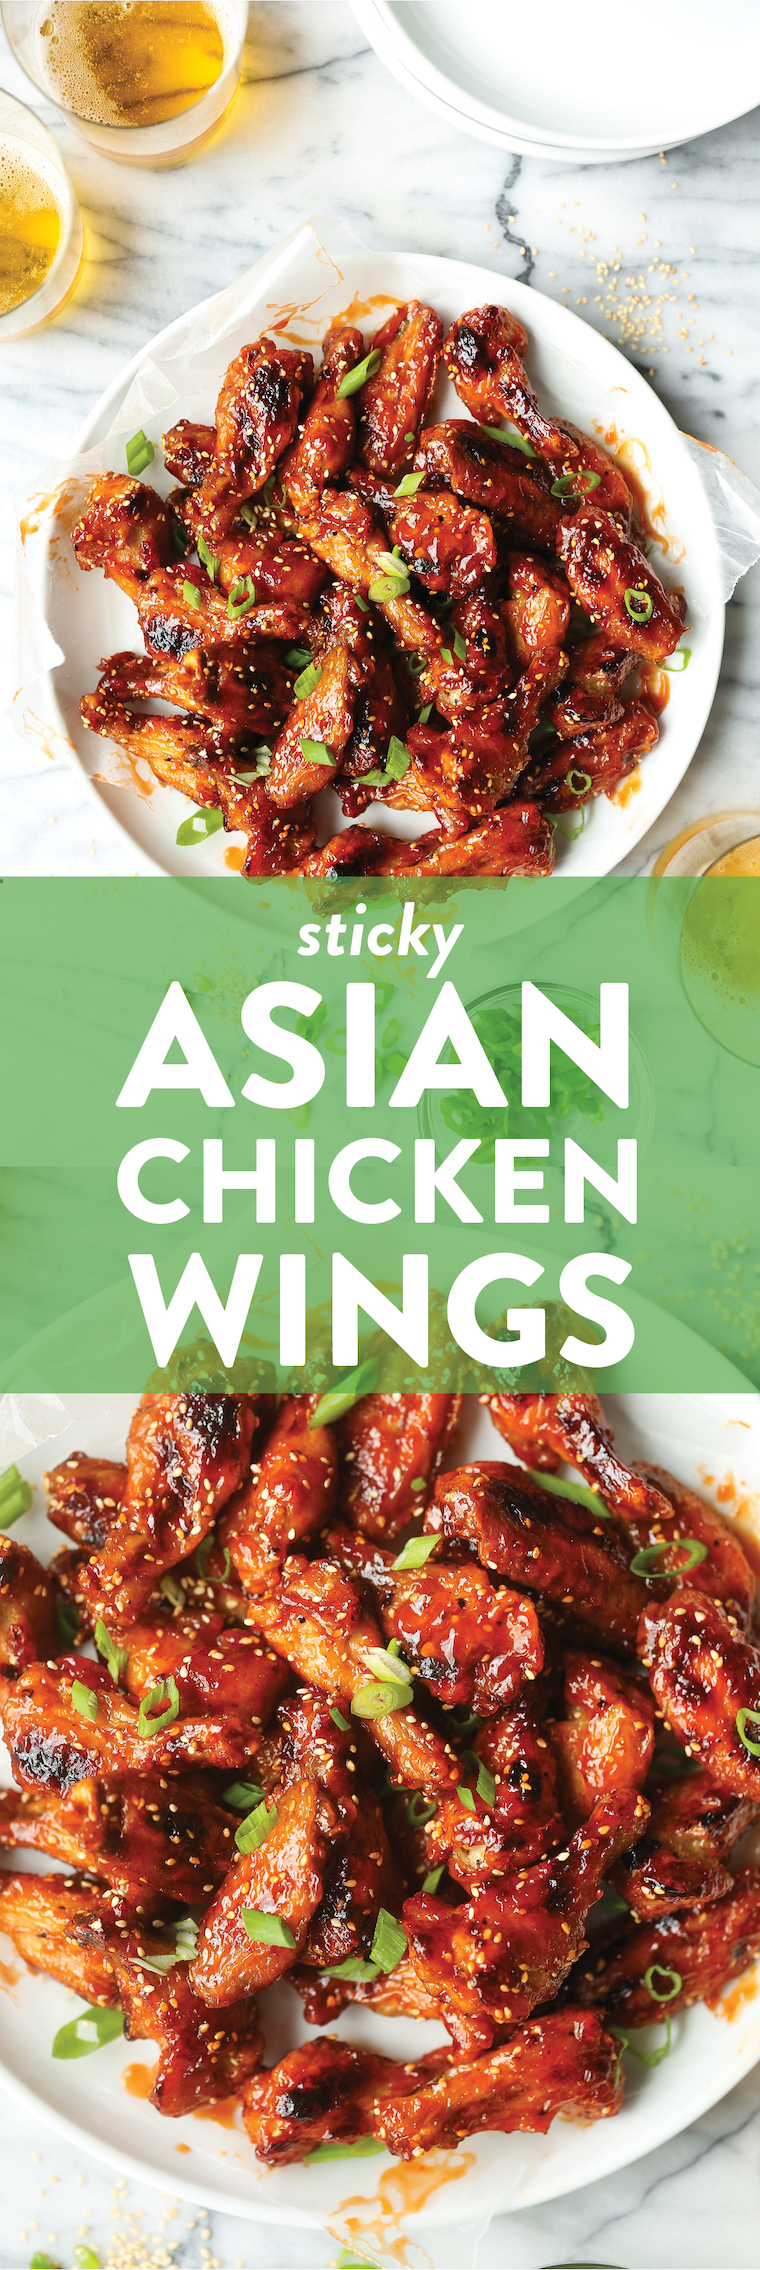 Sticky Asian Chicken Wings - Crispy, sticky, sweet, savory with the most perfect caramelized glaze. Basically best party food ever. SO FINGER-LICKING GOOD.